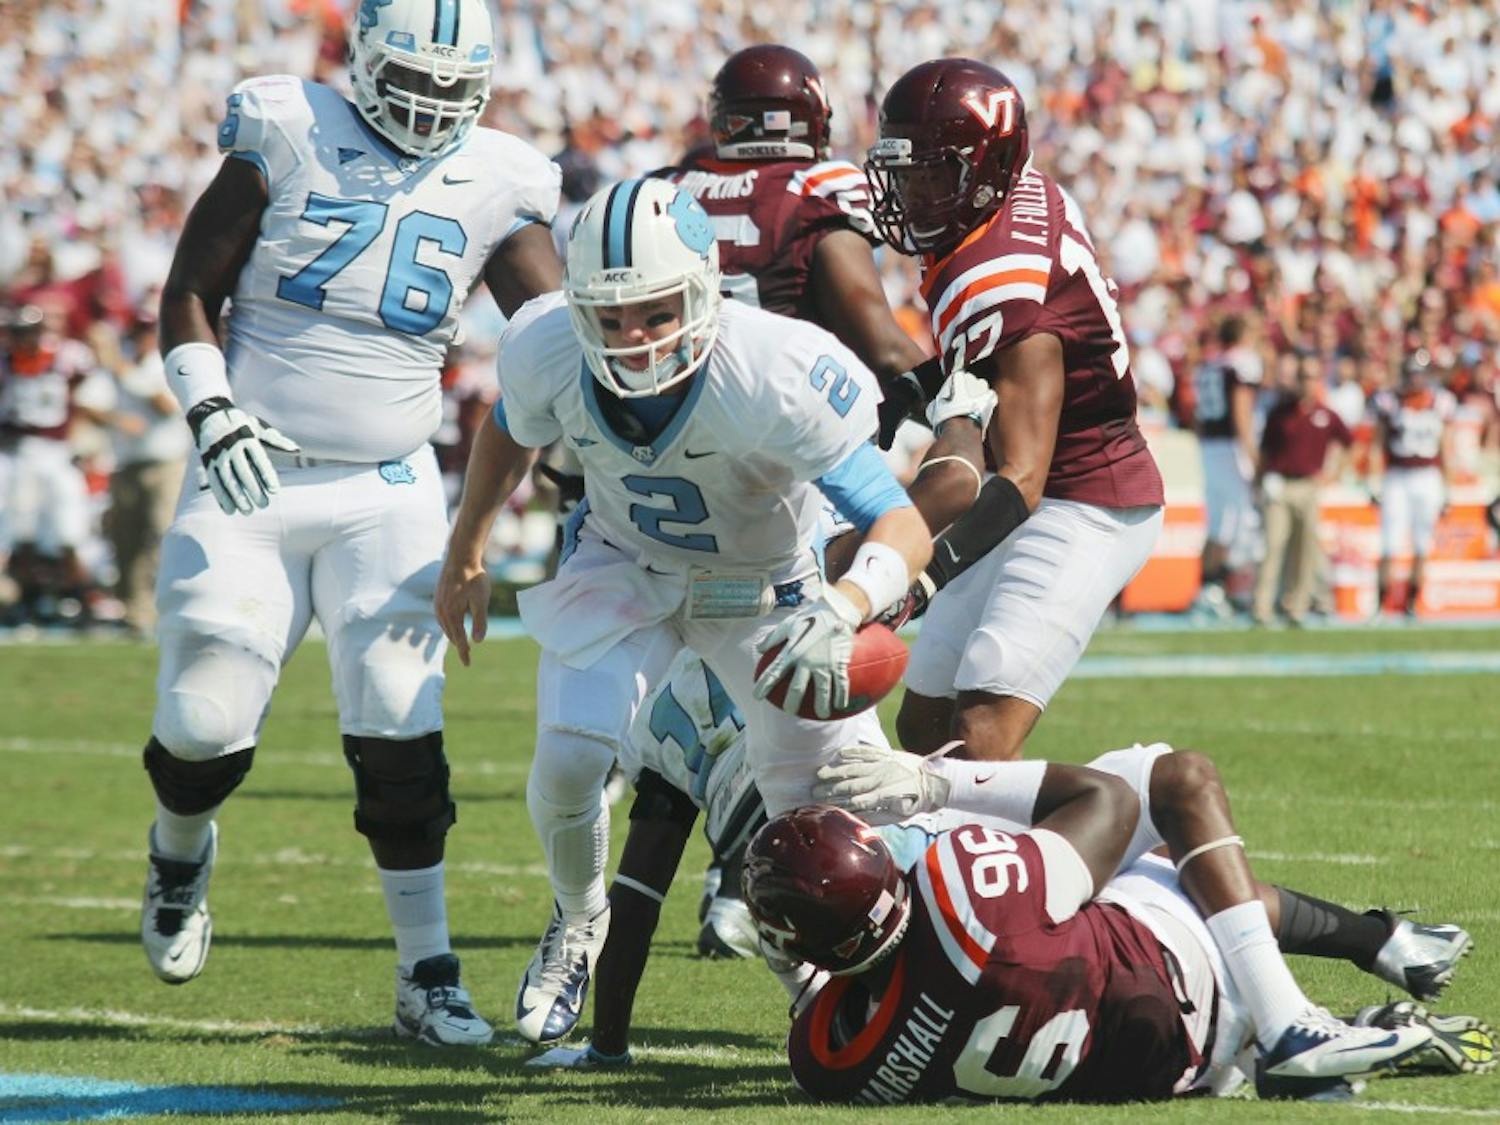 	UNC played Virginia Tech in football on Saturday, October 6 and won 48 to 34.